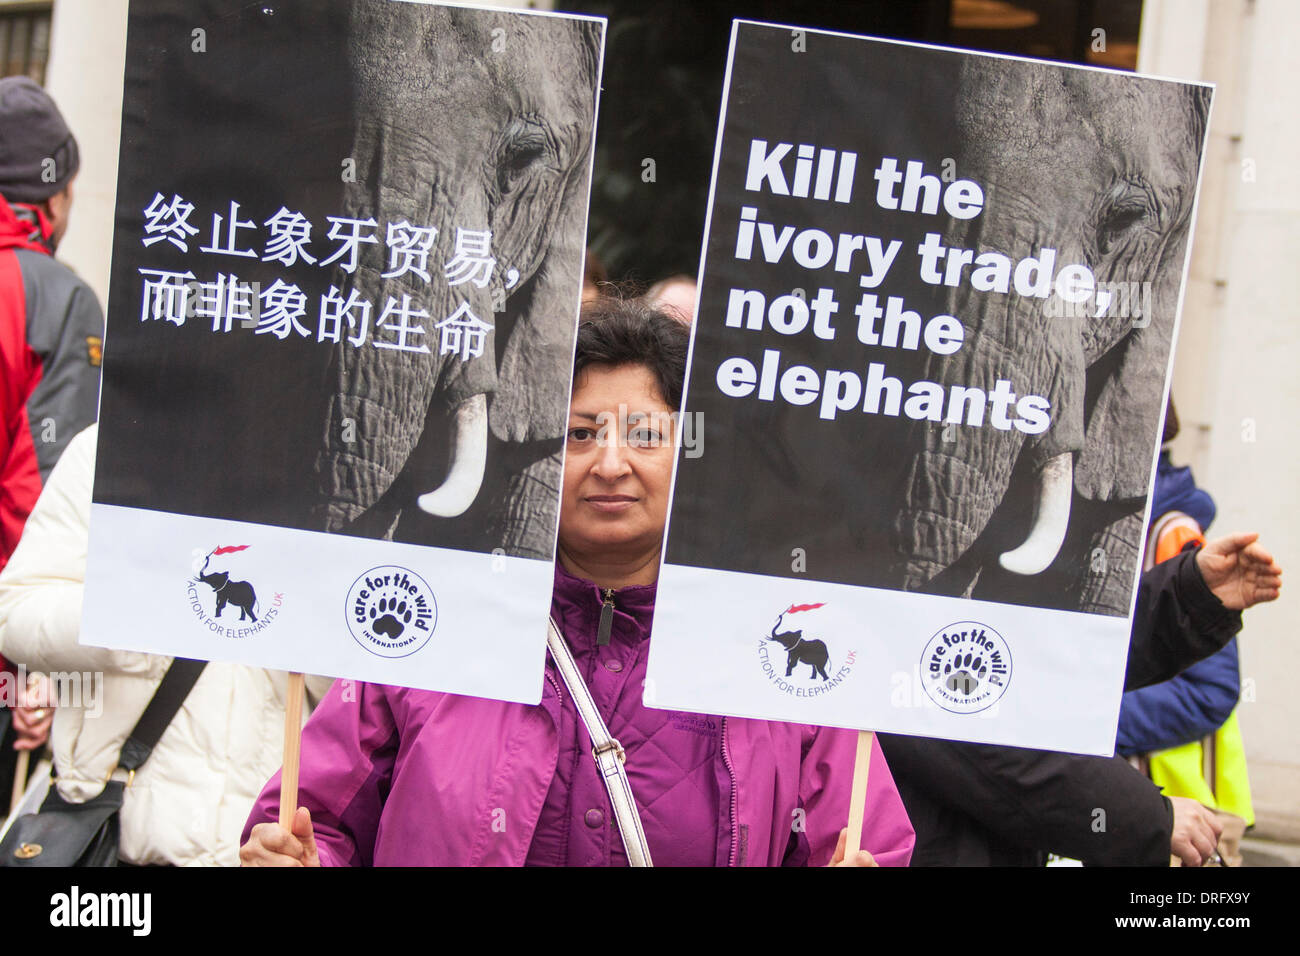 London, UK. January 25 2014. Dozens of animal rights activists demonstrate outside the Chinese embassy in London against the country's demand for ivory that is endangering elephants. Credit:  Paul Davey/Alamy Live News Stock Photo